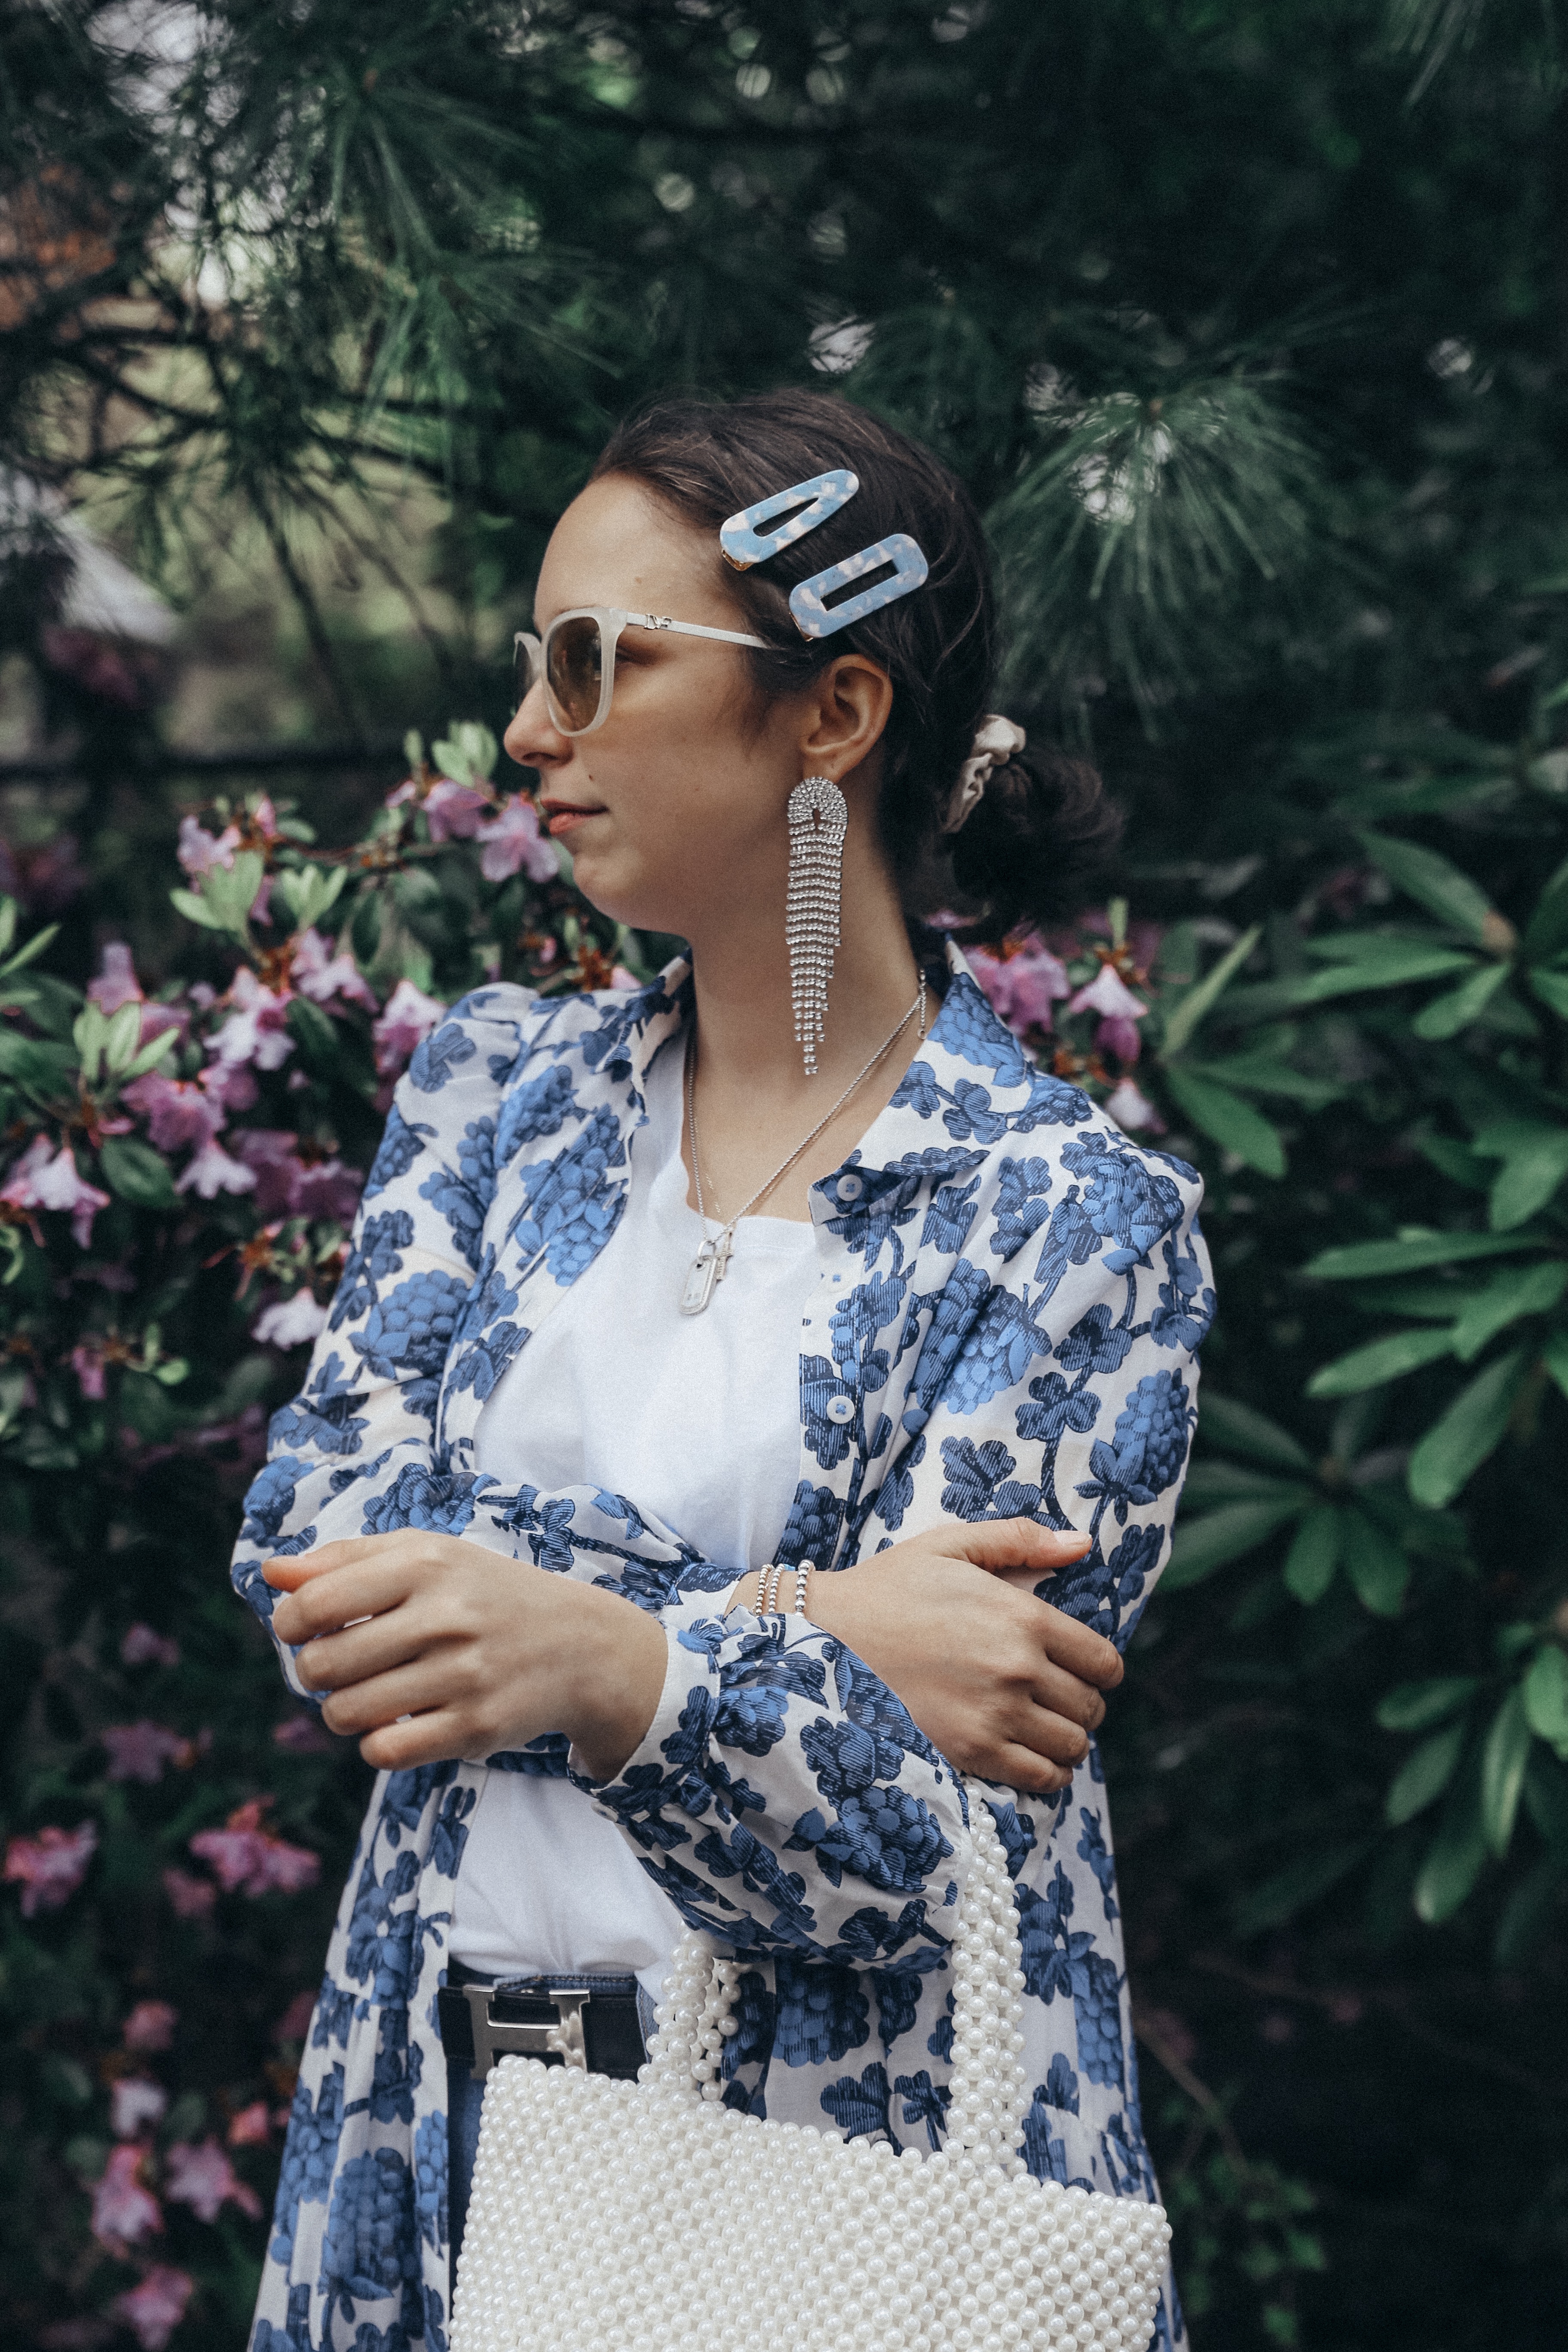 Eye-catching Maxi Dresses for Every Occasion this Summer-Maxi Dress-Re Styled-Outfit-Fashion-Summer-DVF-Marc Fisher #springoutfit #summeroutfit #pearlbag #dvf #barrettes #marcfisher #bloggerstyle #westchester #newyorkblogger #newyorkfashion 